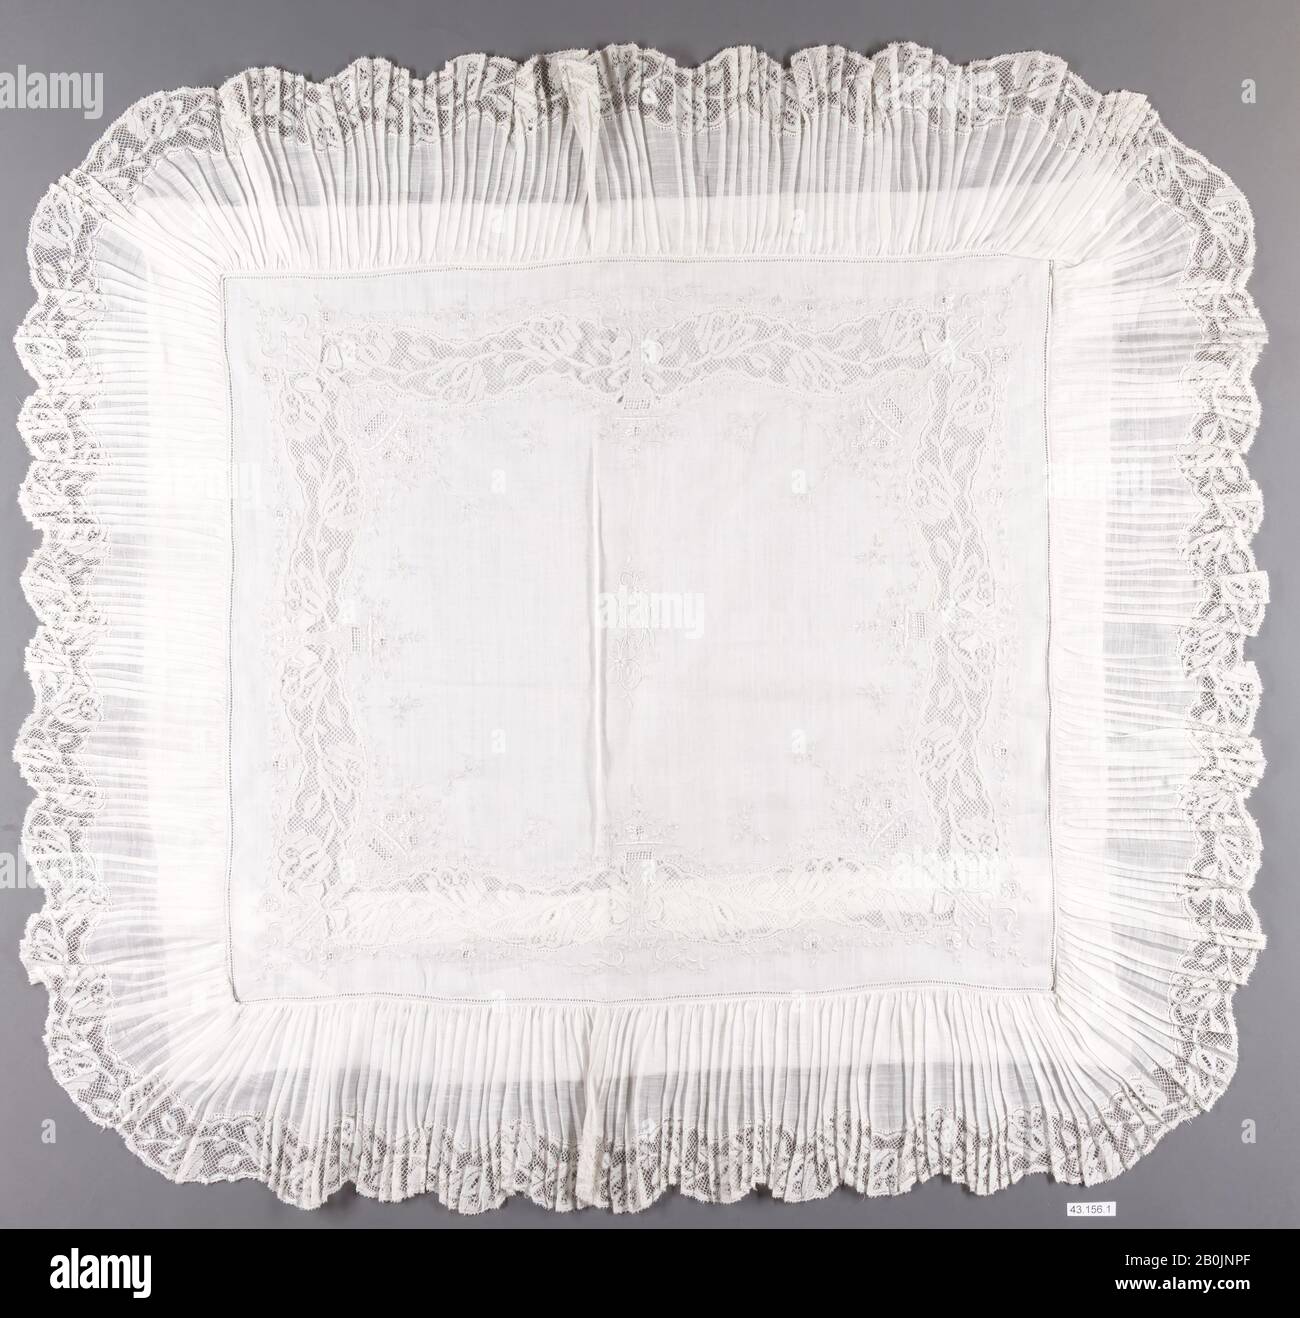 Pillowcase, French, ca. 1890, French, Linen on linen, Approximate: L. 21 x W. 23 inches, 53.3 x 58.4 cm, Textiles-Embroidered Stock Photo